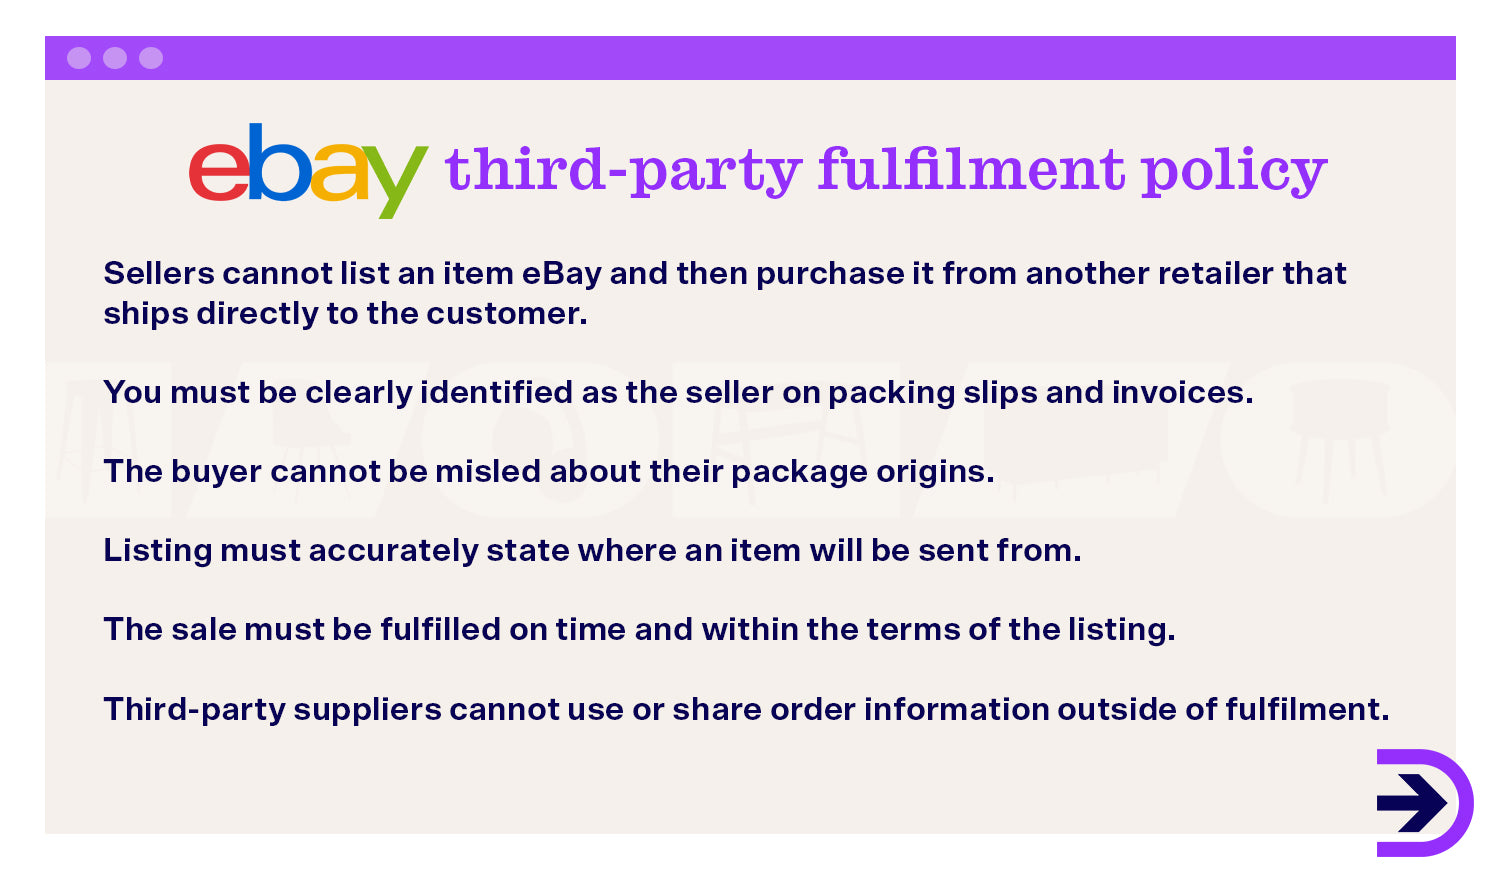 eBay's third-party fulfilment policy states that the package and listing must be clearly identifiable to be from where the customer has purchased from.